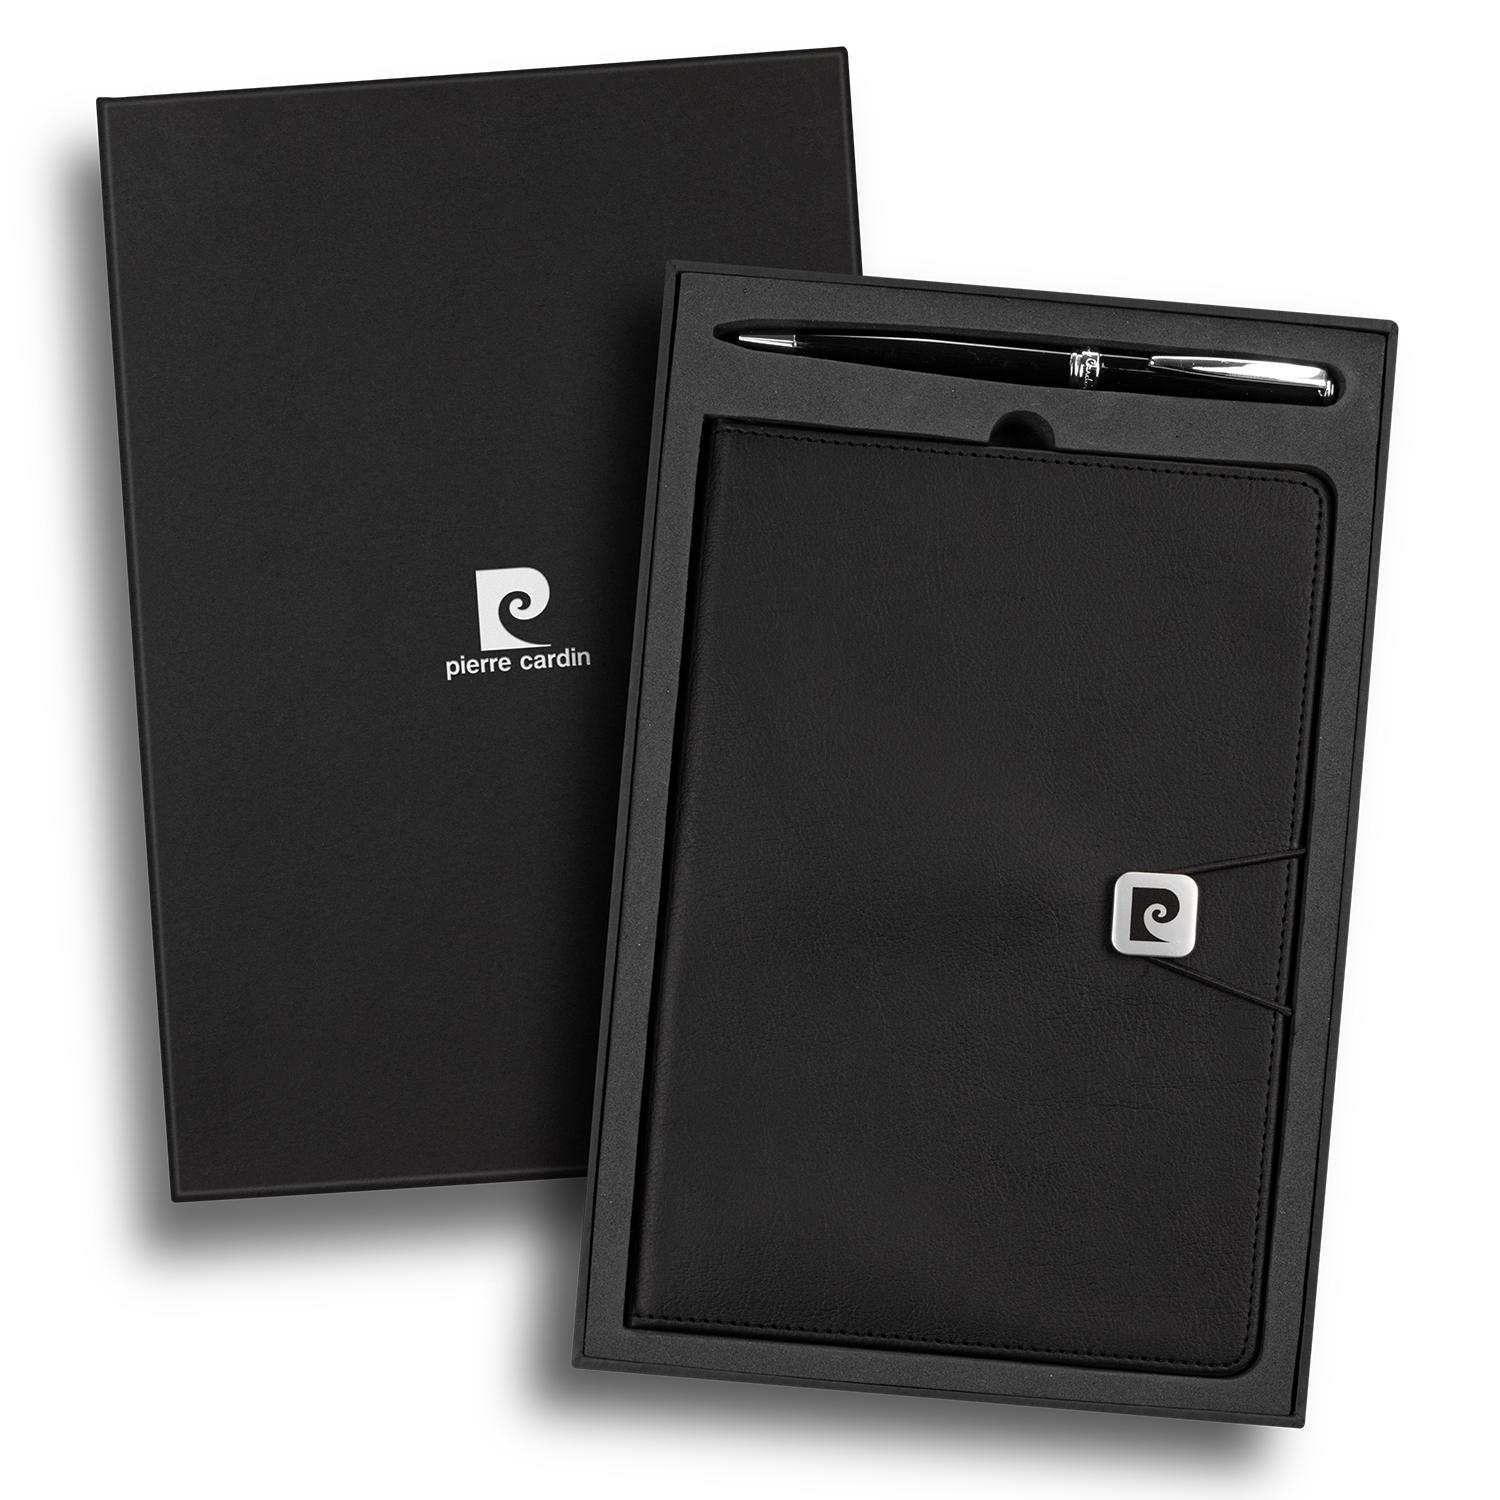 Pierre Cardin Pierre Cardin Biarritz Notebook and Pen Gift Set and